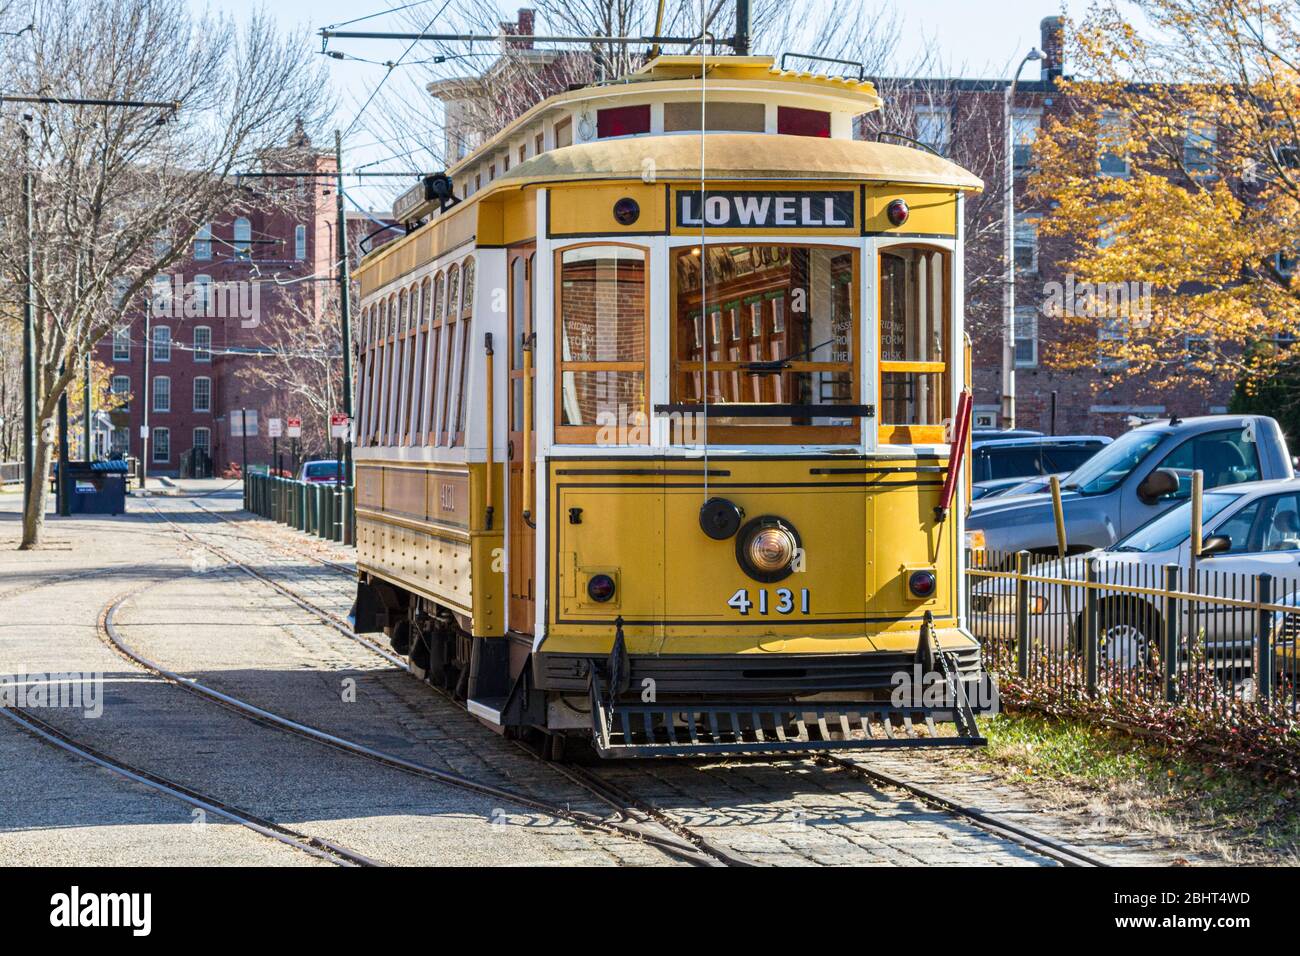 A trolley car at the Lowell National Park, Lowell, Massachusetts Stock Photo